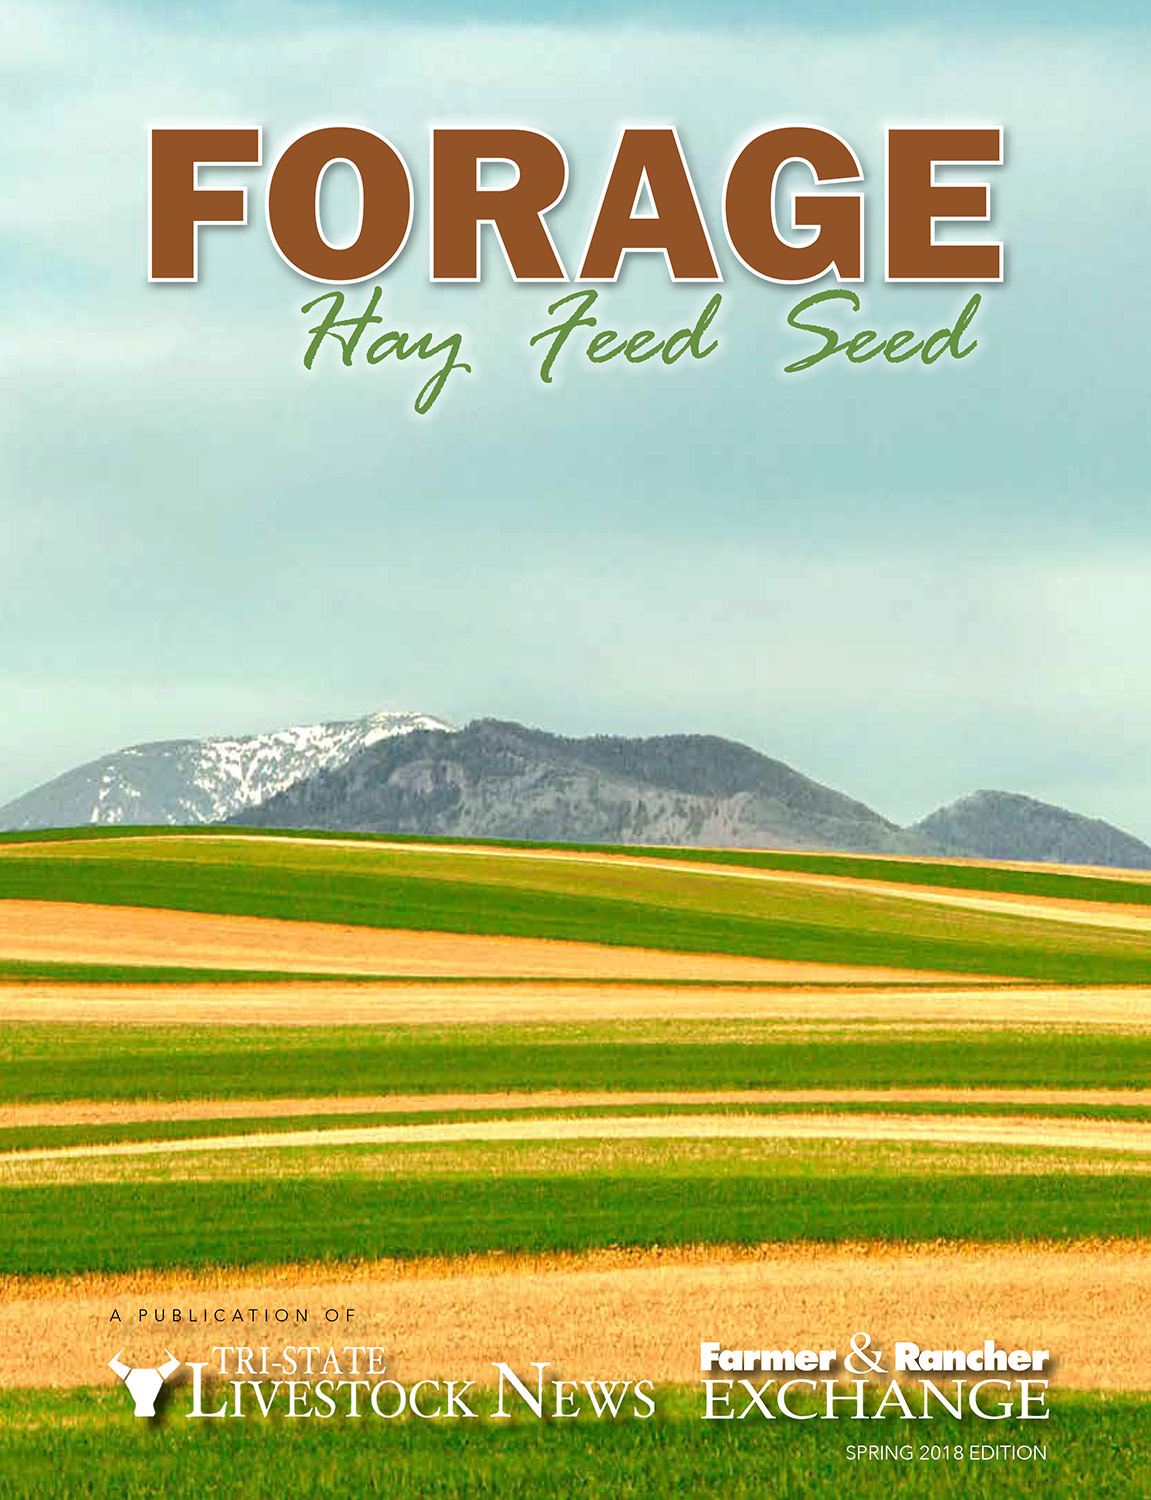 Photo of farm fields appears on cover of Forage Magazine